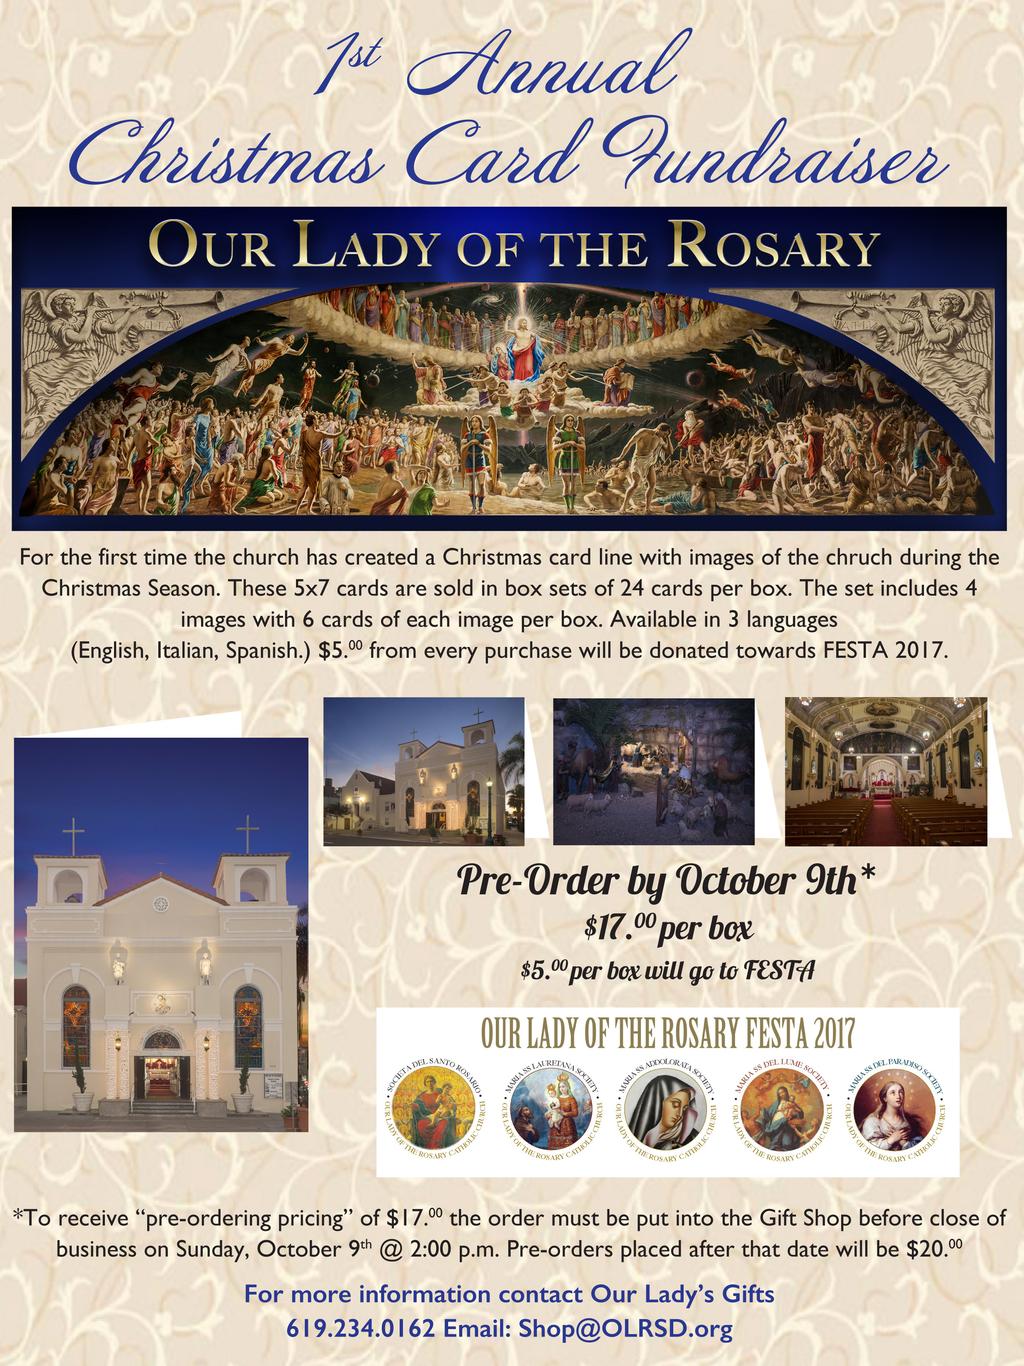 Our Lady of the Rosary Page